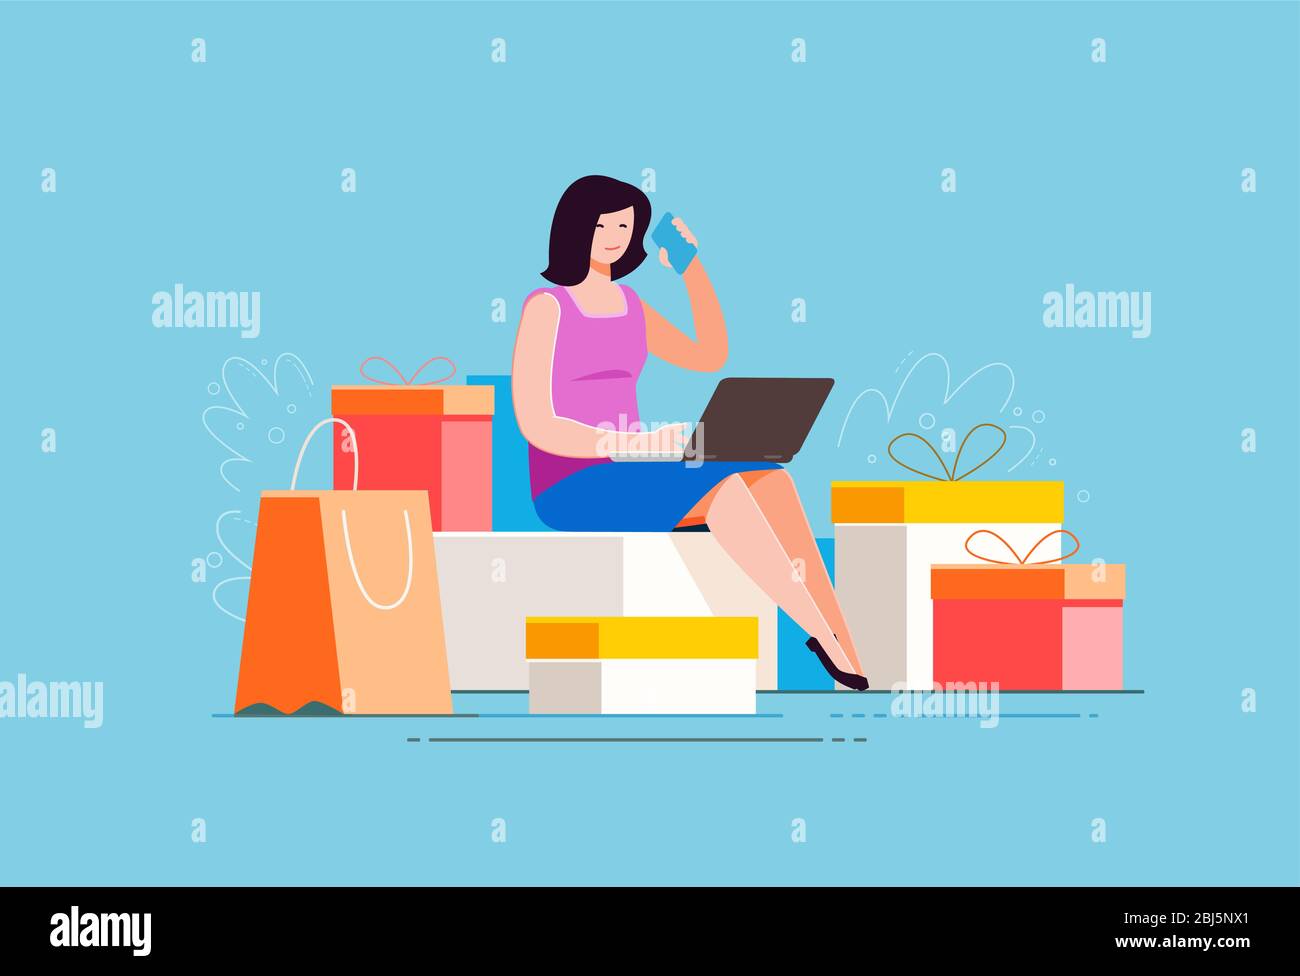 Purchase of goods using online store. Shopping, fashion vector illustration Stock Vector